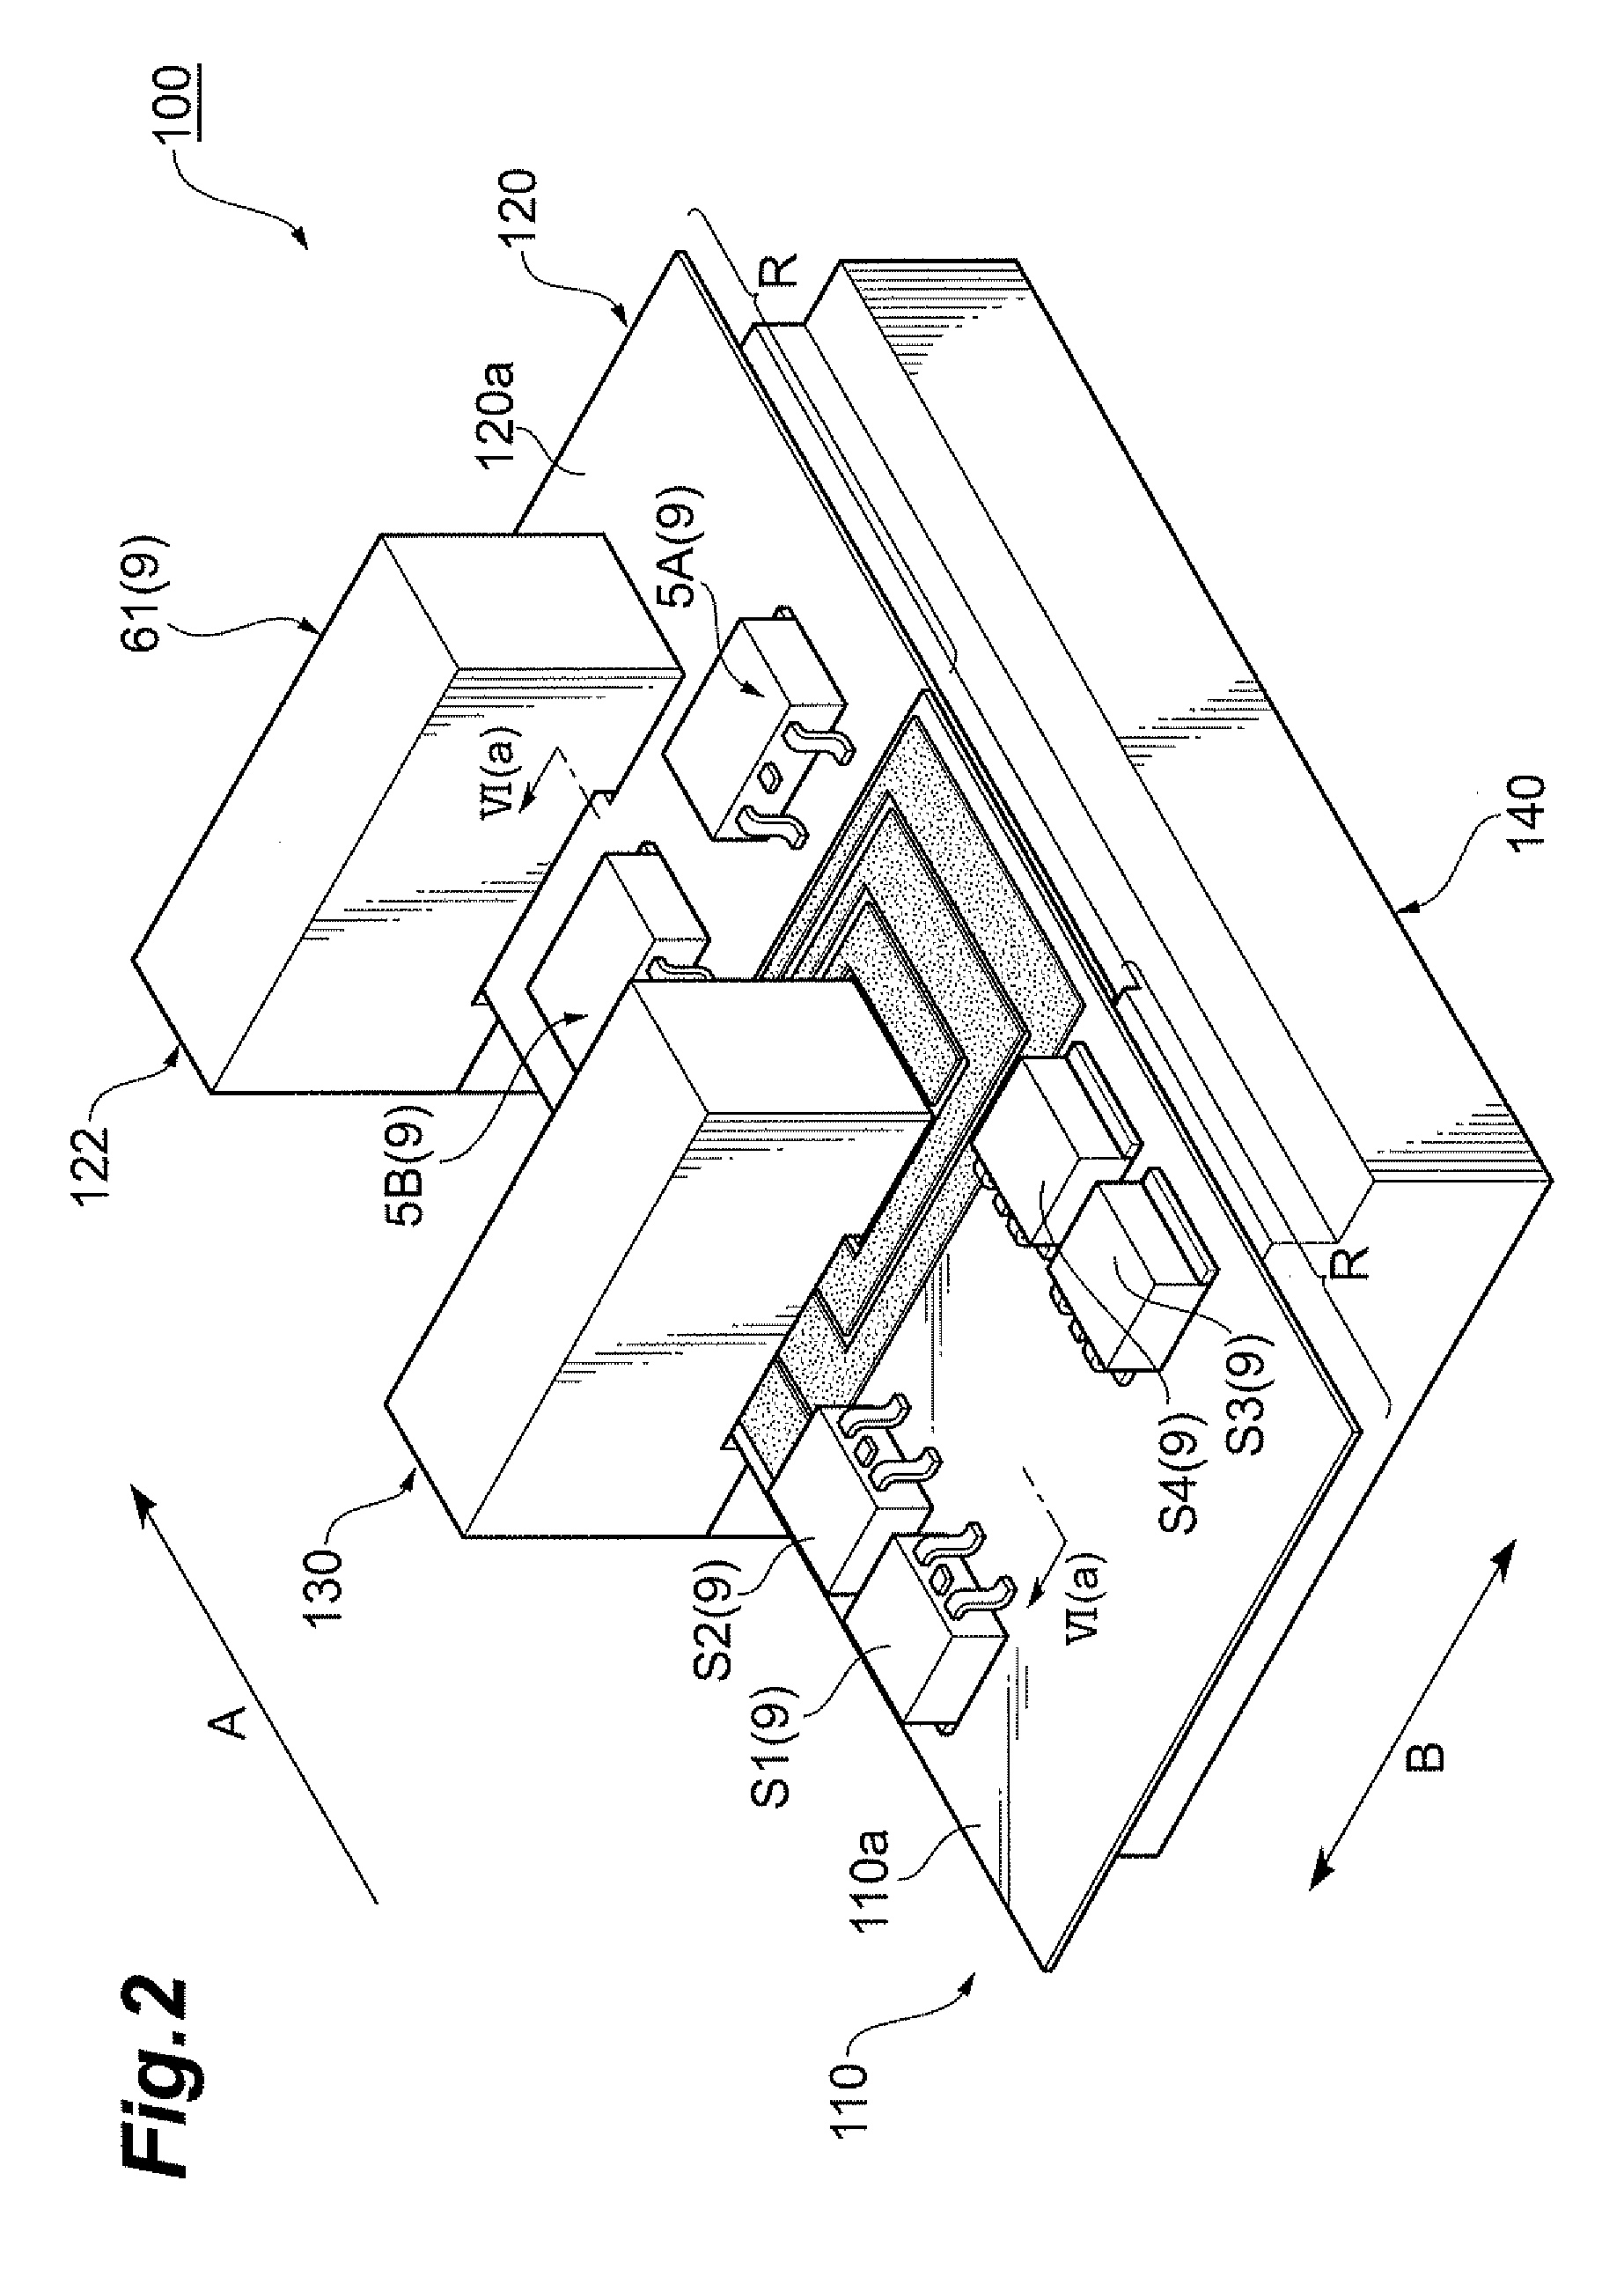 Coil substrate structure, substrate holding structure, and switching power supply